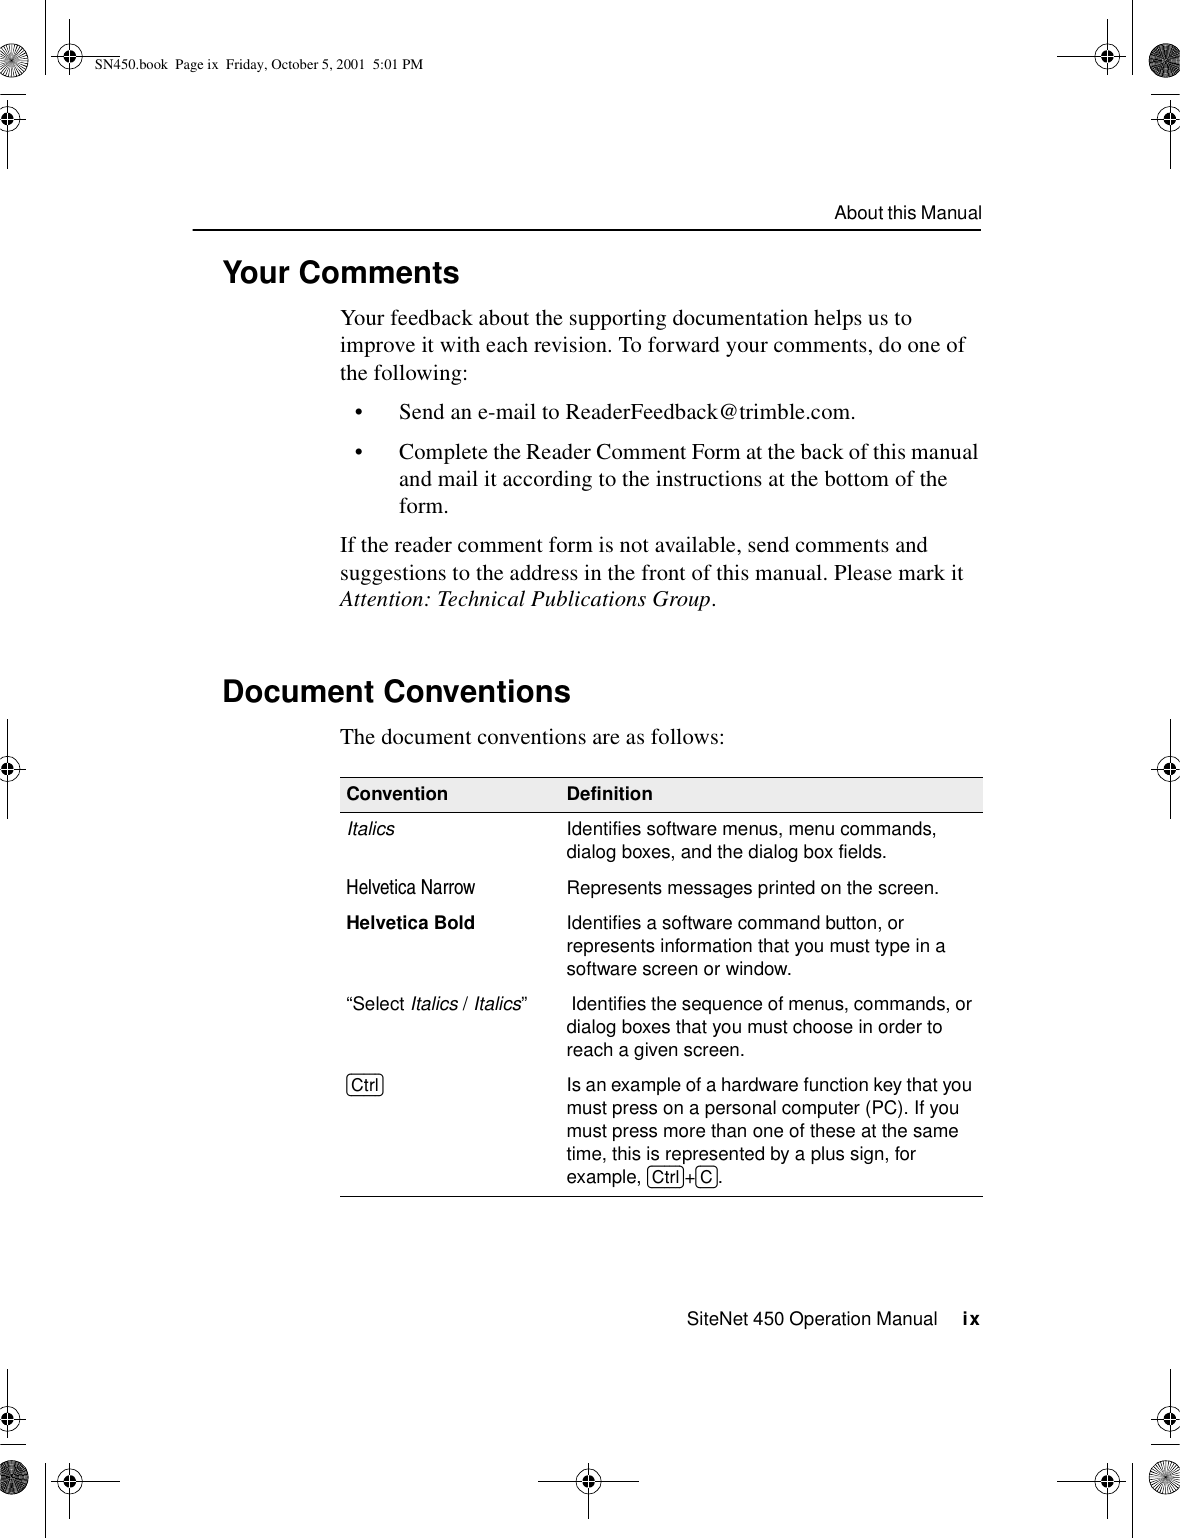 About this ManualSiteNet 450 Operation Manual     ixYour CommentsYour feedback about the supporting documentation helps us to improve it with each revision. To forward your comments, do one of the following:•Send an e-mail to ReaderFeedback@trimble.com.•Complete the Reader Comment Form at the back of this manual and mail it according to the instructions at the bottom of the form. If the reader comment form is not available, send comments and suggestions to the address in the front of this manual. Please mark it Attention: Technical Publications Group. Document ConventionsThe document conventions are as follows:Convention DefinitionItalics Identifies software menus, menu commands, dialog boxes, and the dialog box fields.Helvetica Narrow Represents messages printed on the screen.Helvetica Bold Identifies a software command button, or represents information that you must type in a software screen or window.“Select Italics /Italics”  Identifies the sequence of menus, commands, or dialog boxes that you must choose in order to reach a given screen.[Ctrl]  Is an example of a hardware function key that you must press on a personal computer (PC). If you must press more than one of these at the same time, this is represented by a plus sign, for example, [Ctrl]+[C].SN450.book  Page ix  Friday, October 5, 2001  5:01 PM